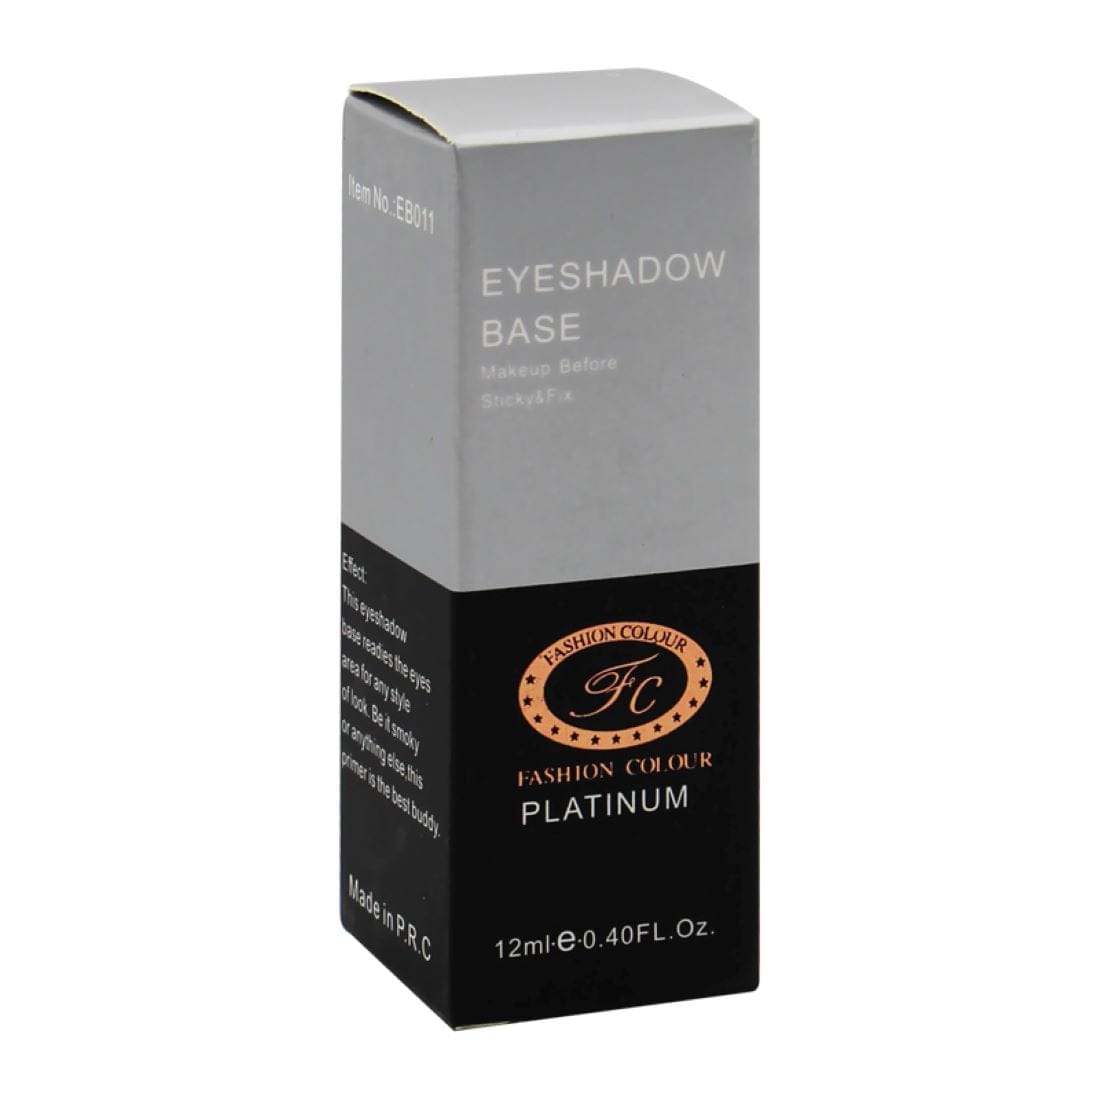 Platinum Eyeshadow base Primer ensures maximum pigmentation and increased longevity Crease-proof and smudge-proof shadow security. Moisturizing ingredients make your lids smooth and ensure the eye shadow evenly fits on your eyelids.